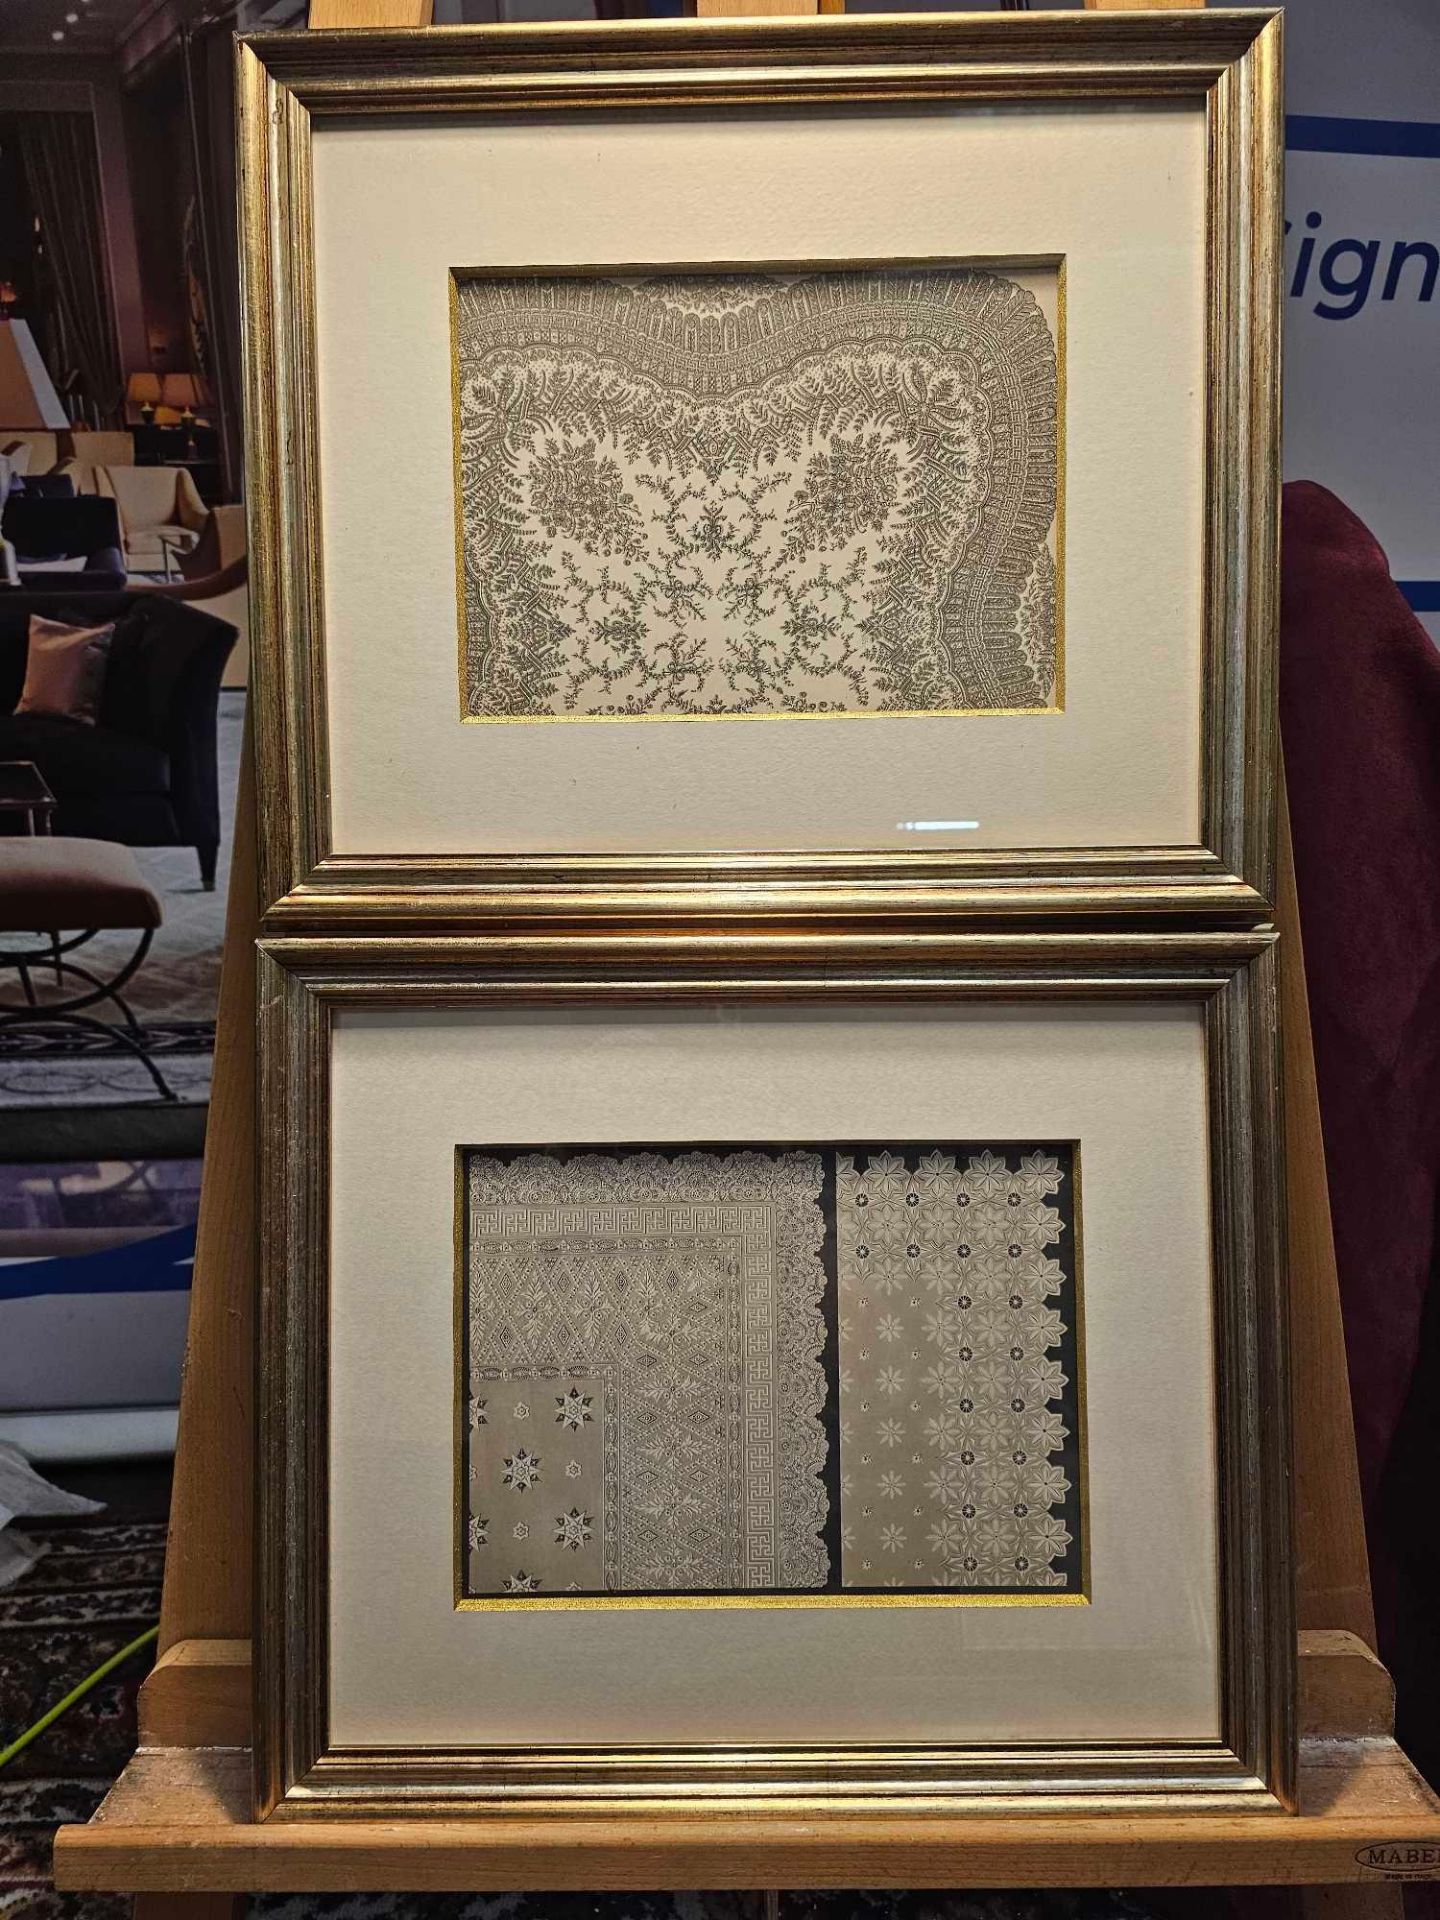 2 x Framed Prints (1) A Lace Shawl By W Vickers, Nottingham. Illustration For Masterpieces of